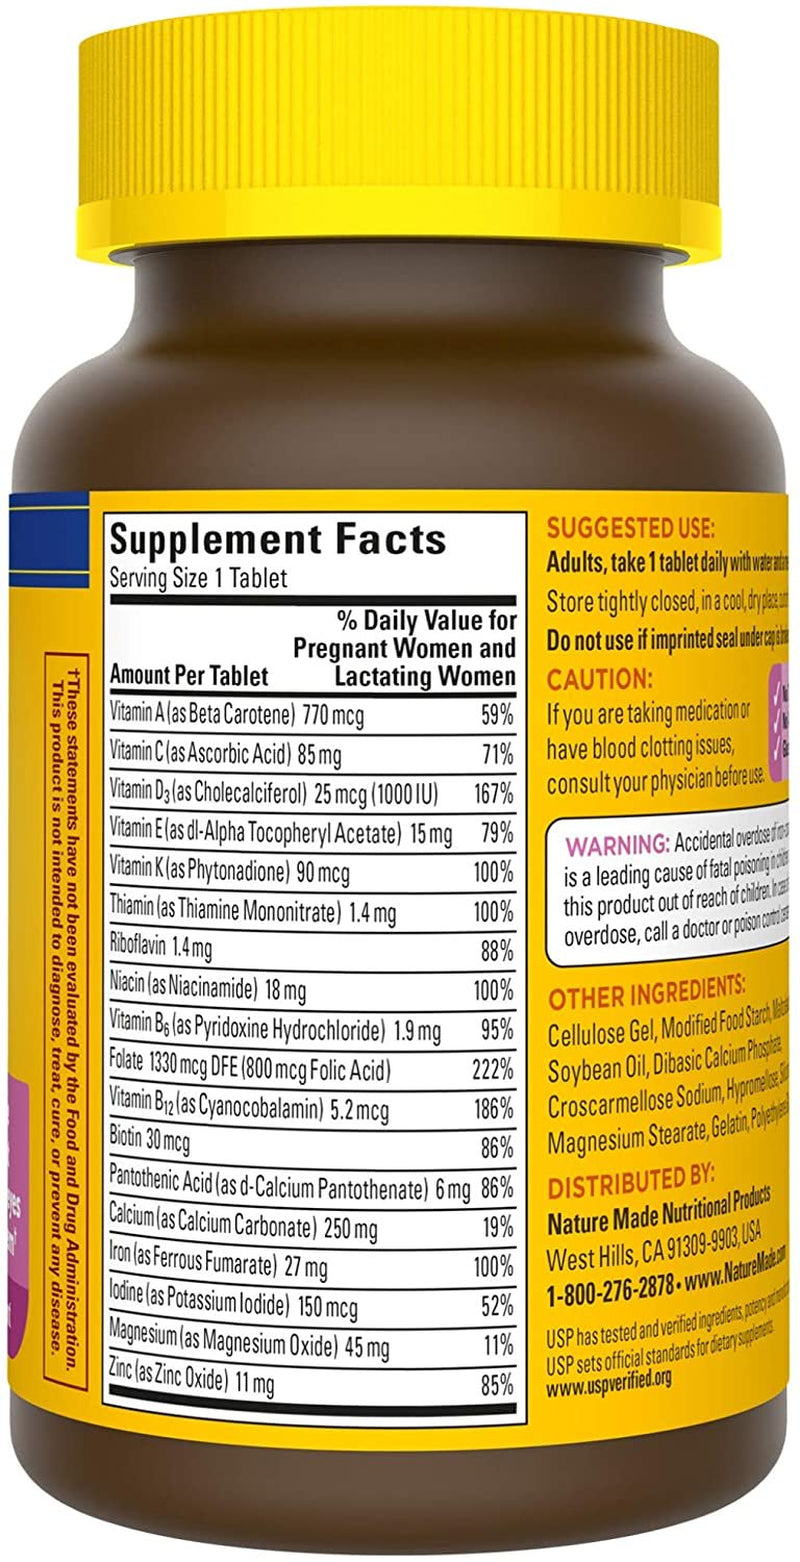 Nature Made Prenatal Multi Dietary Supplement , 90 Tablets Ea (Pack of 2)